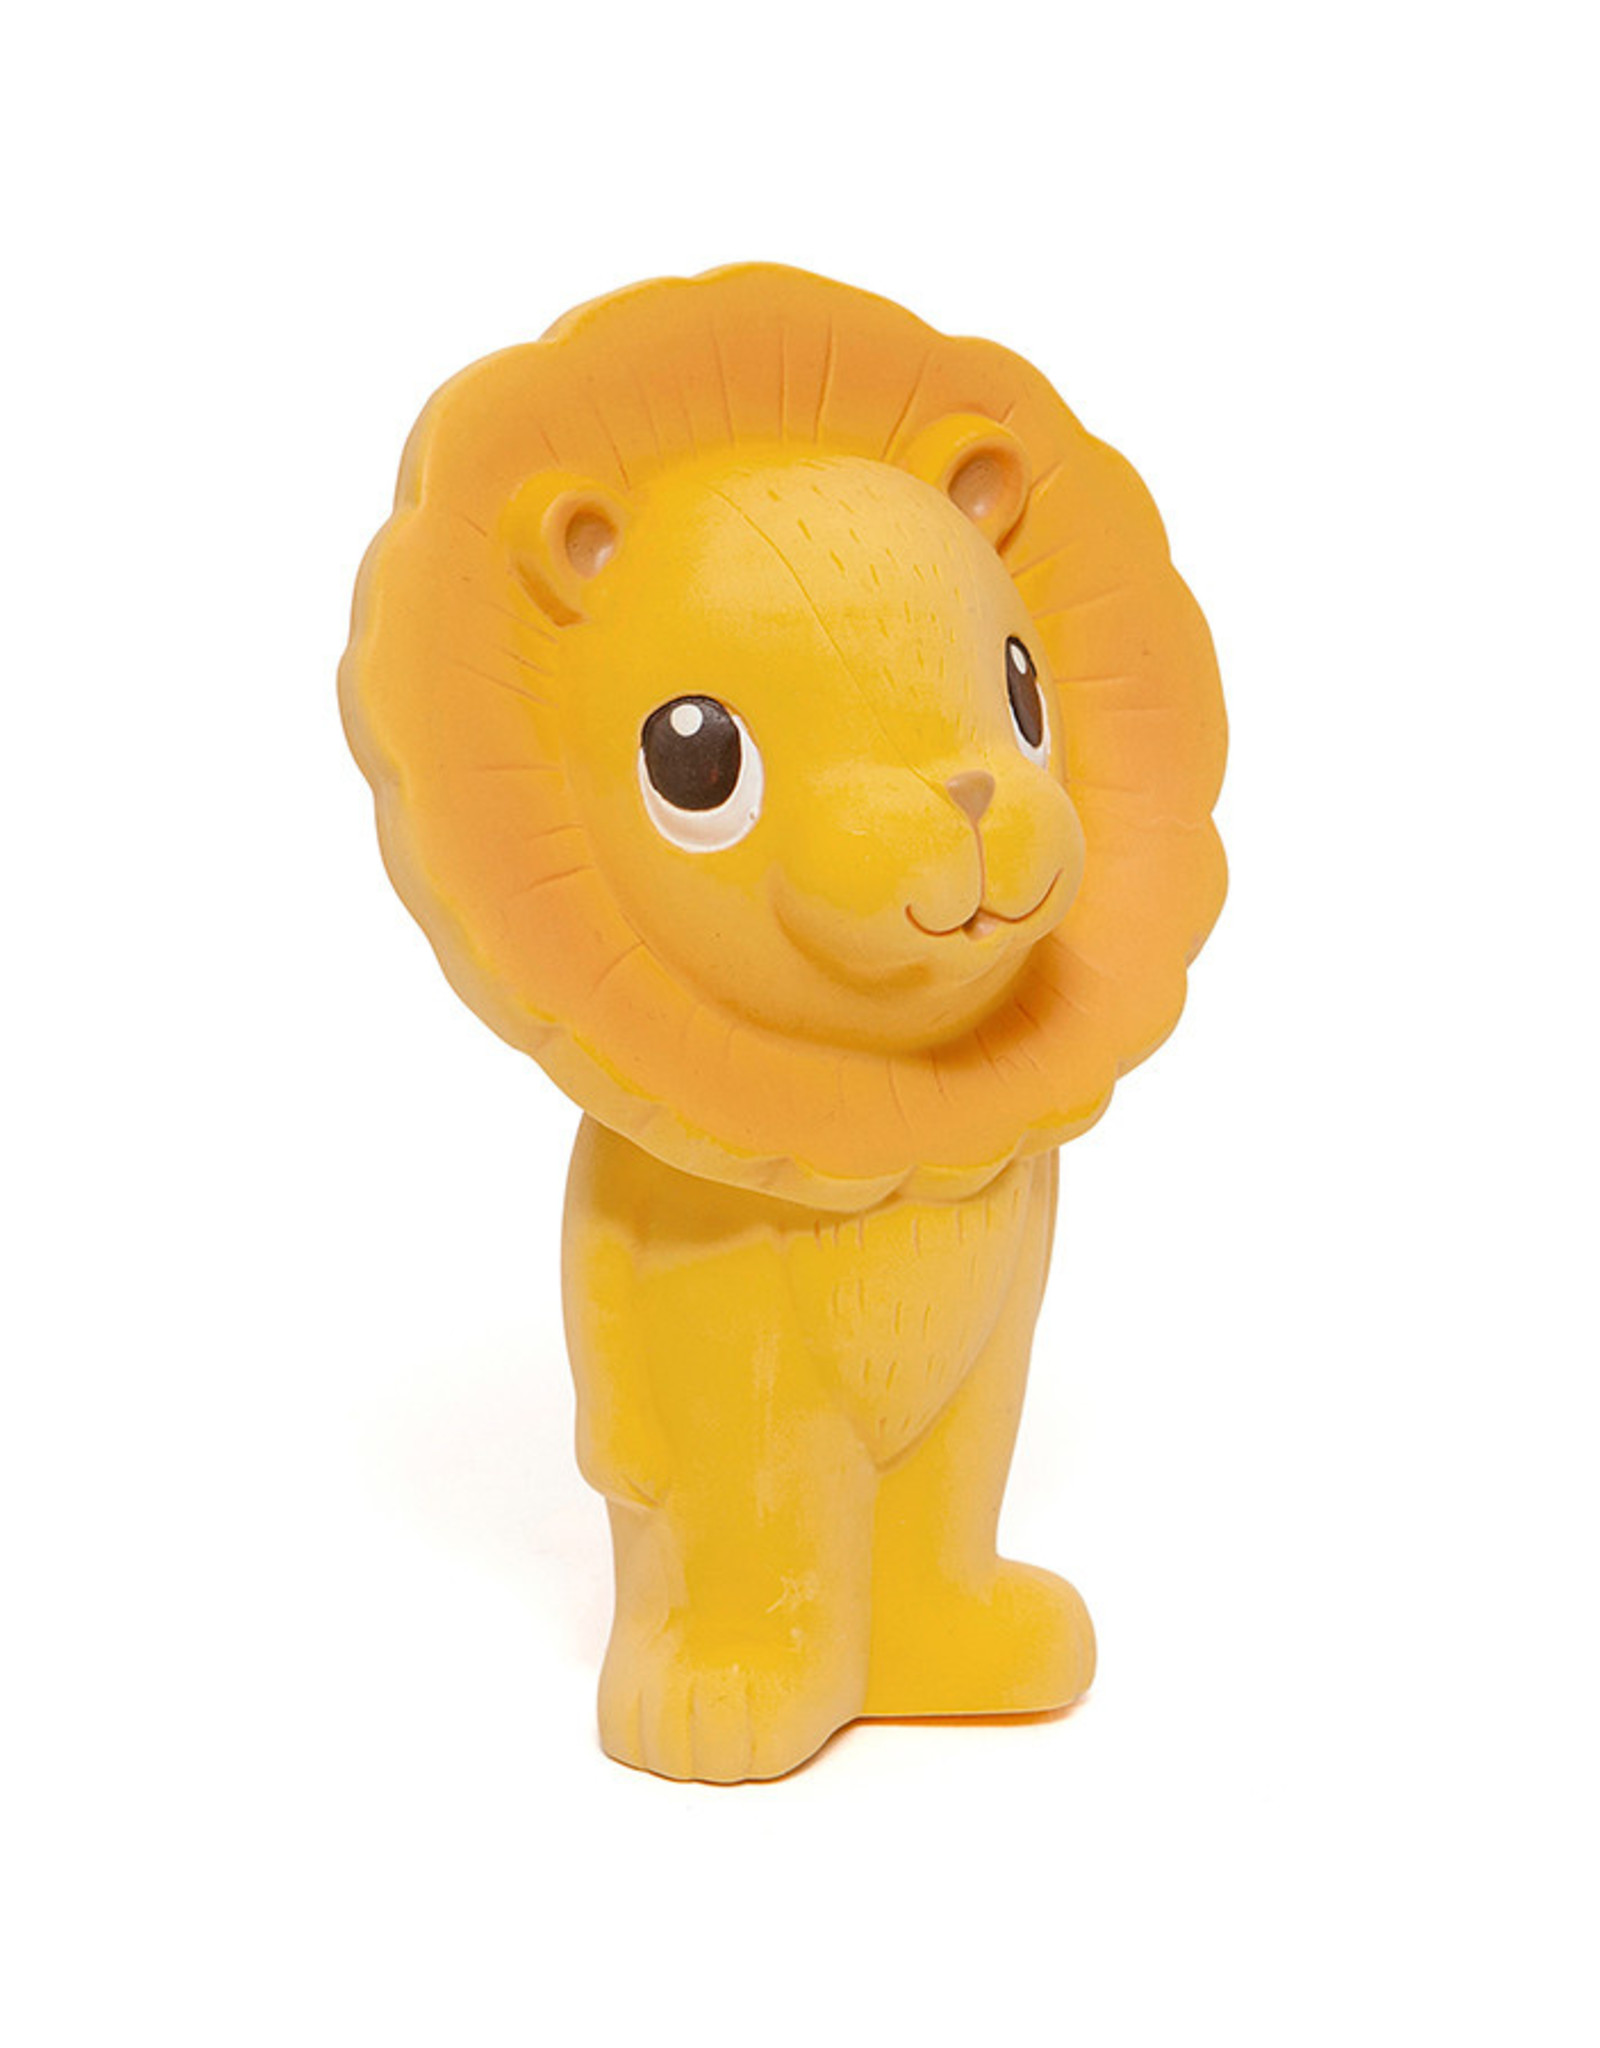 rubber lion toy